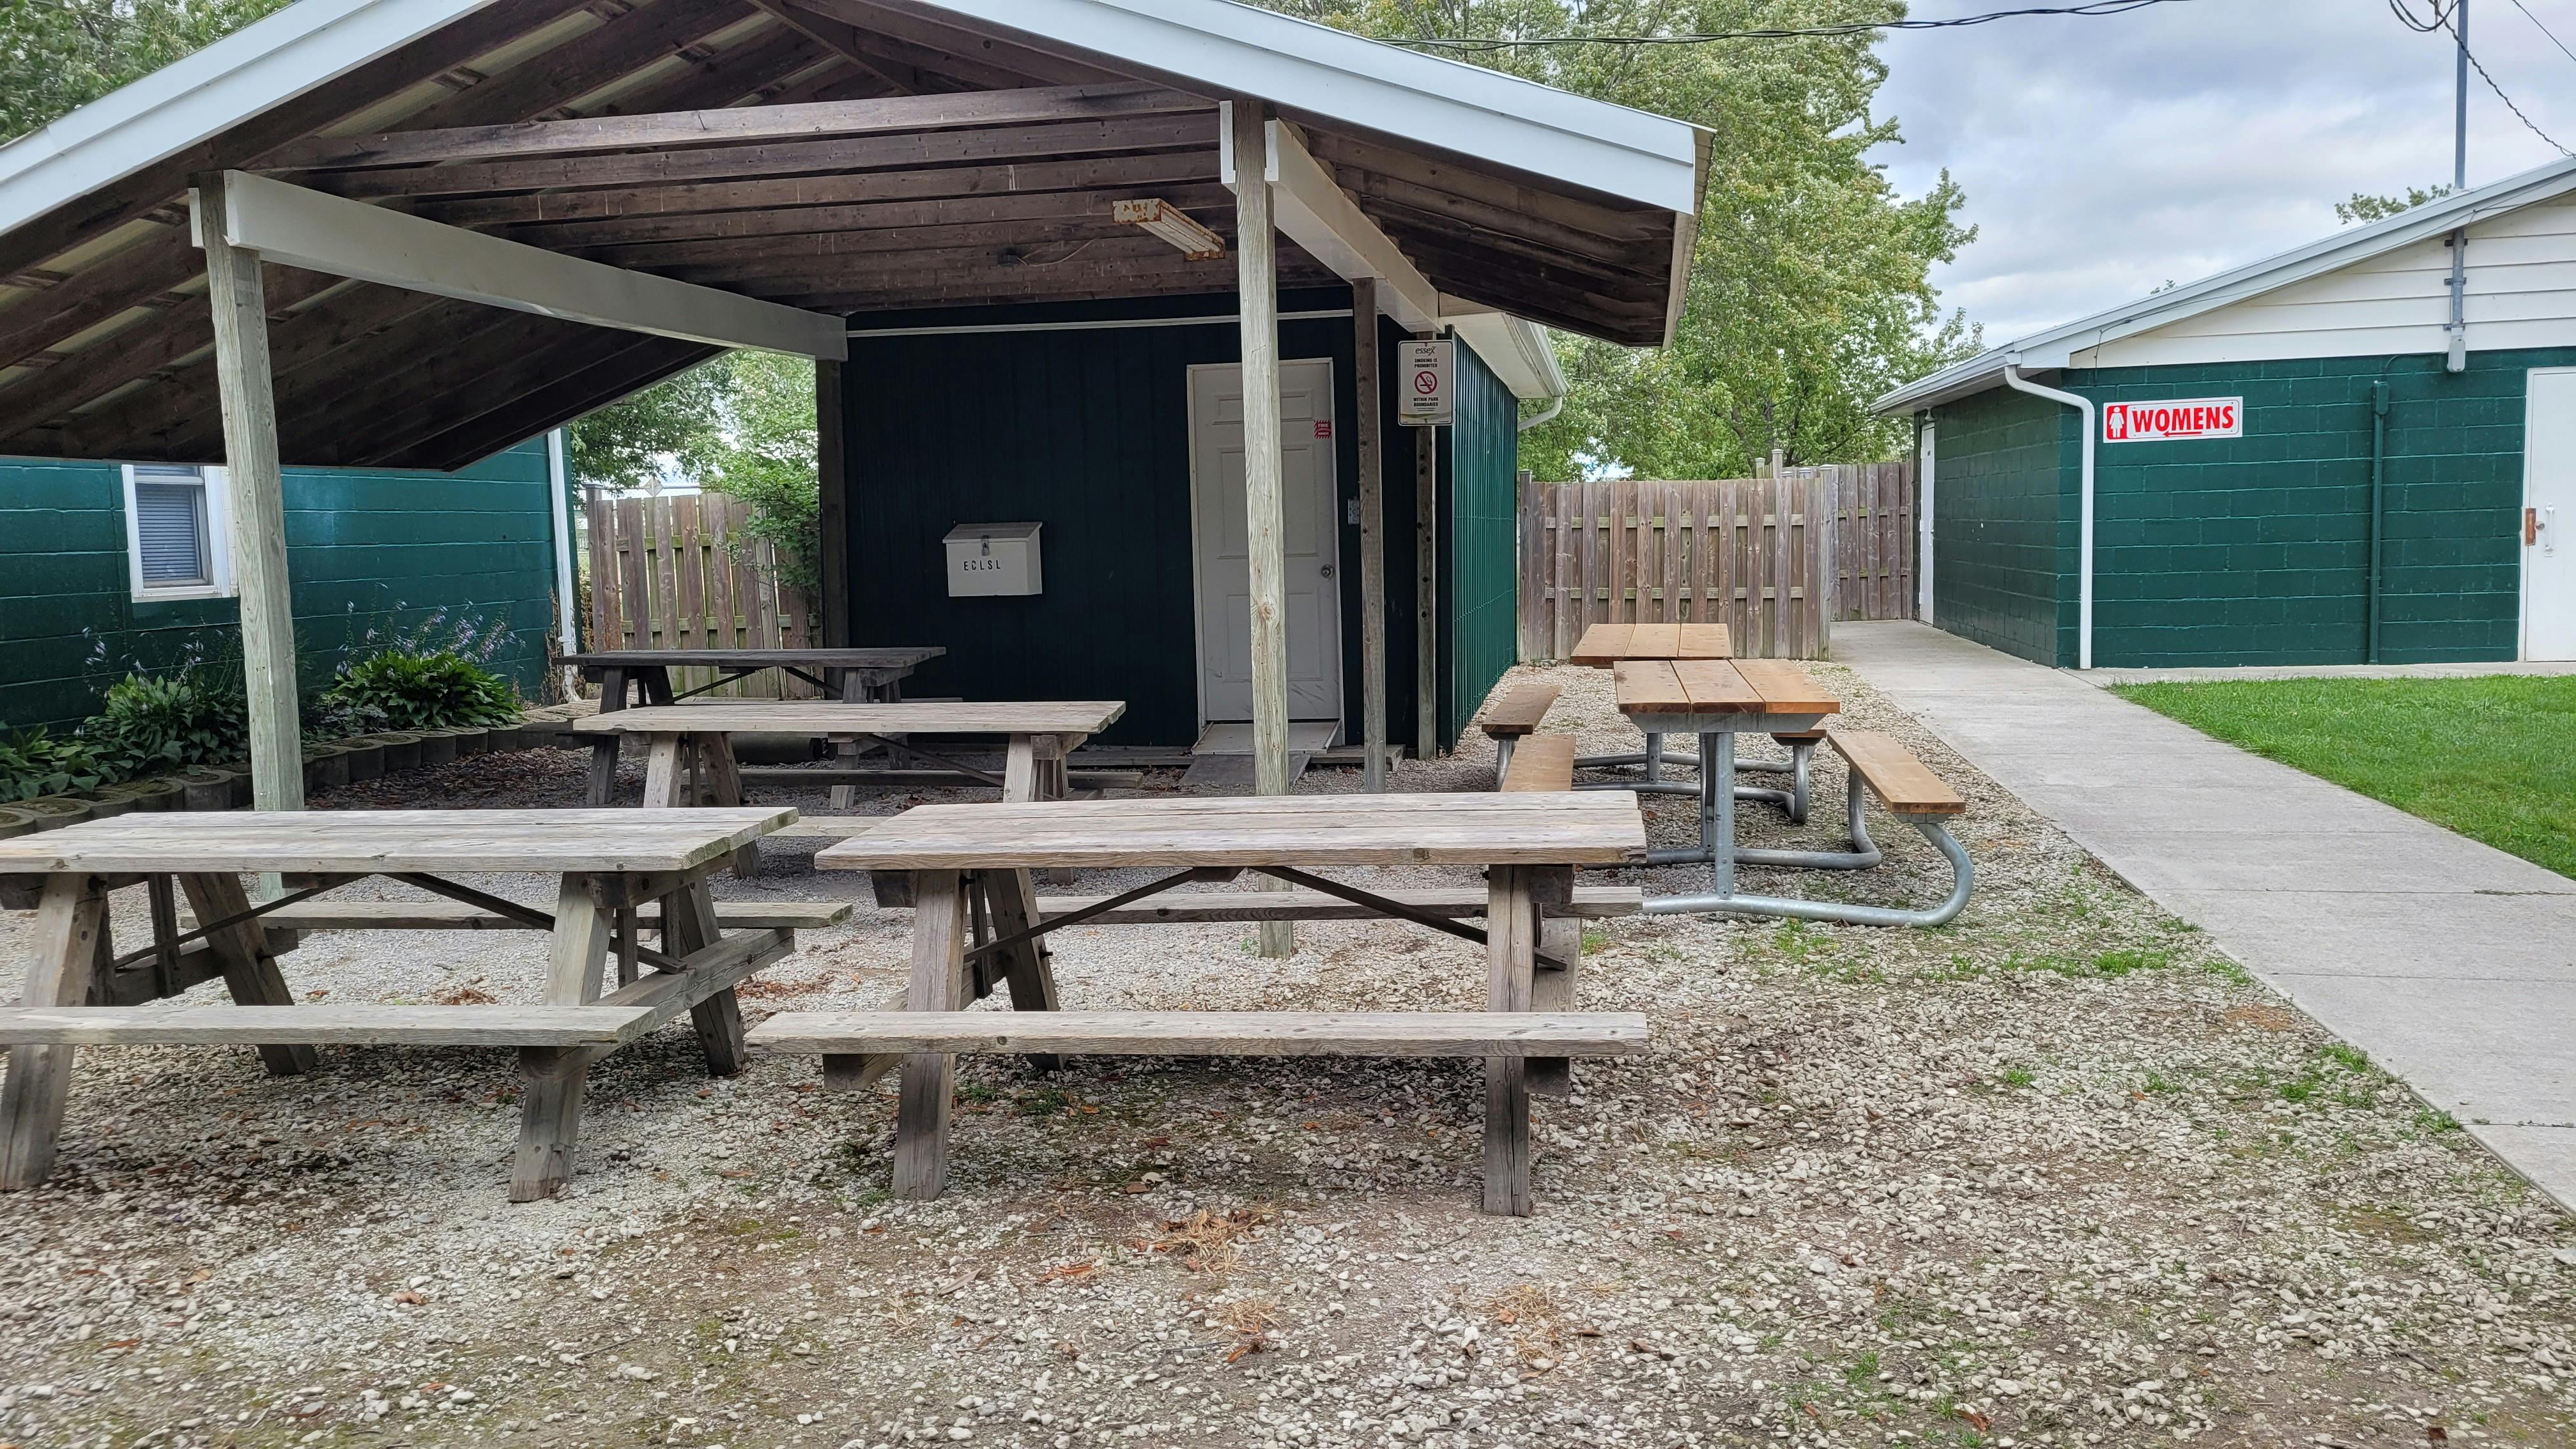 Existing small building and shelter with picnic tables